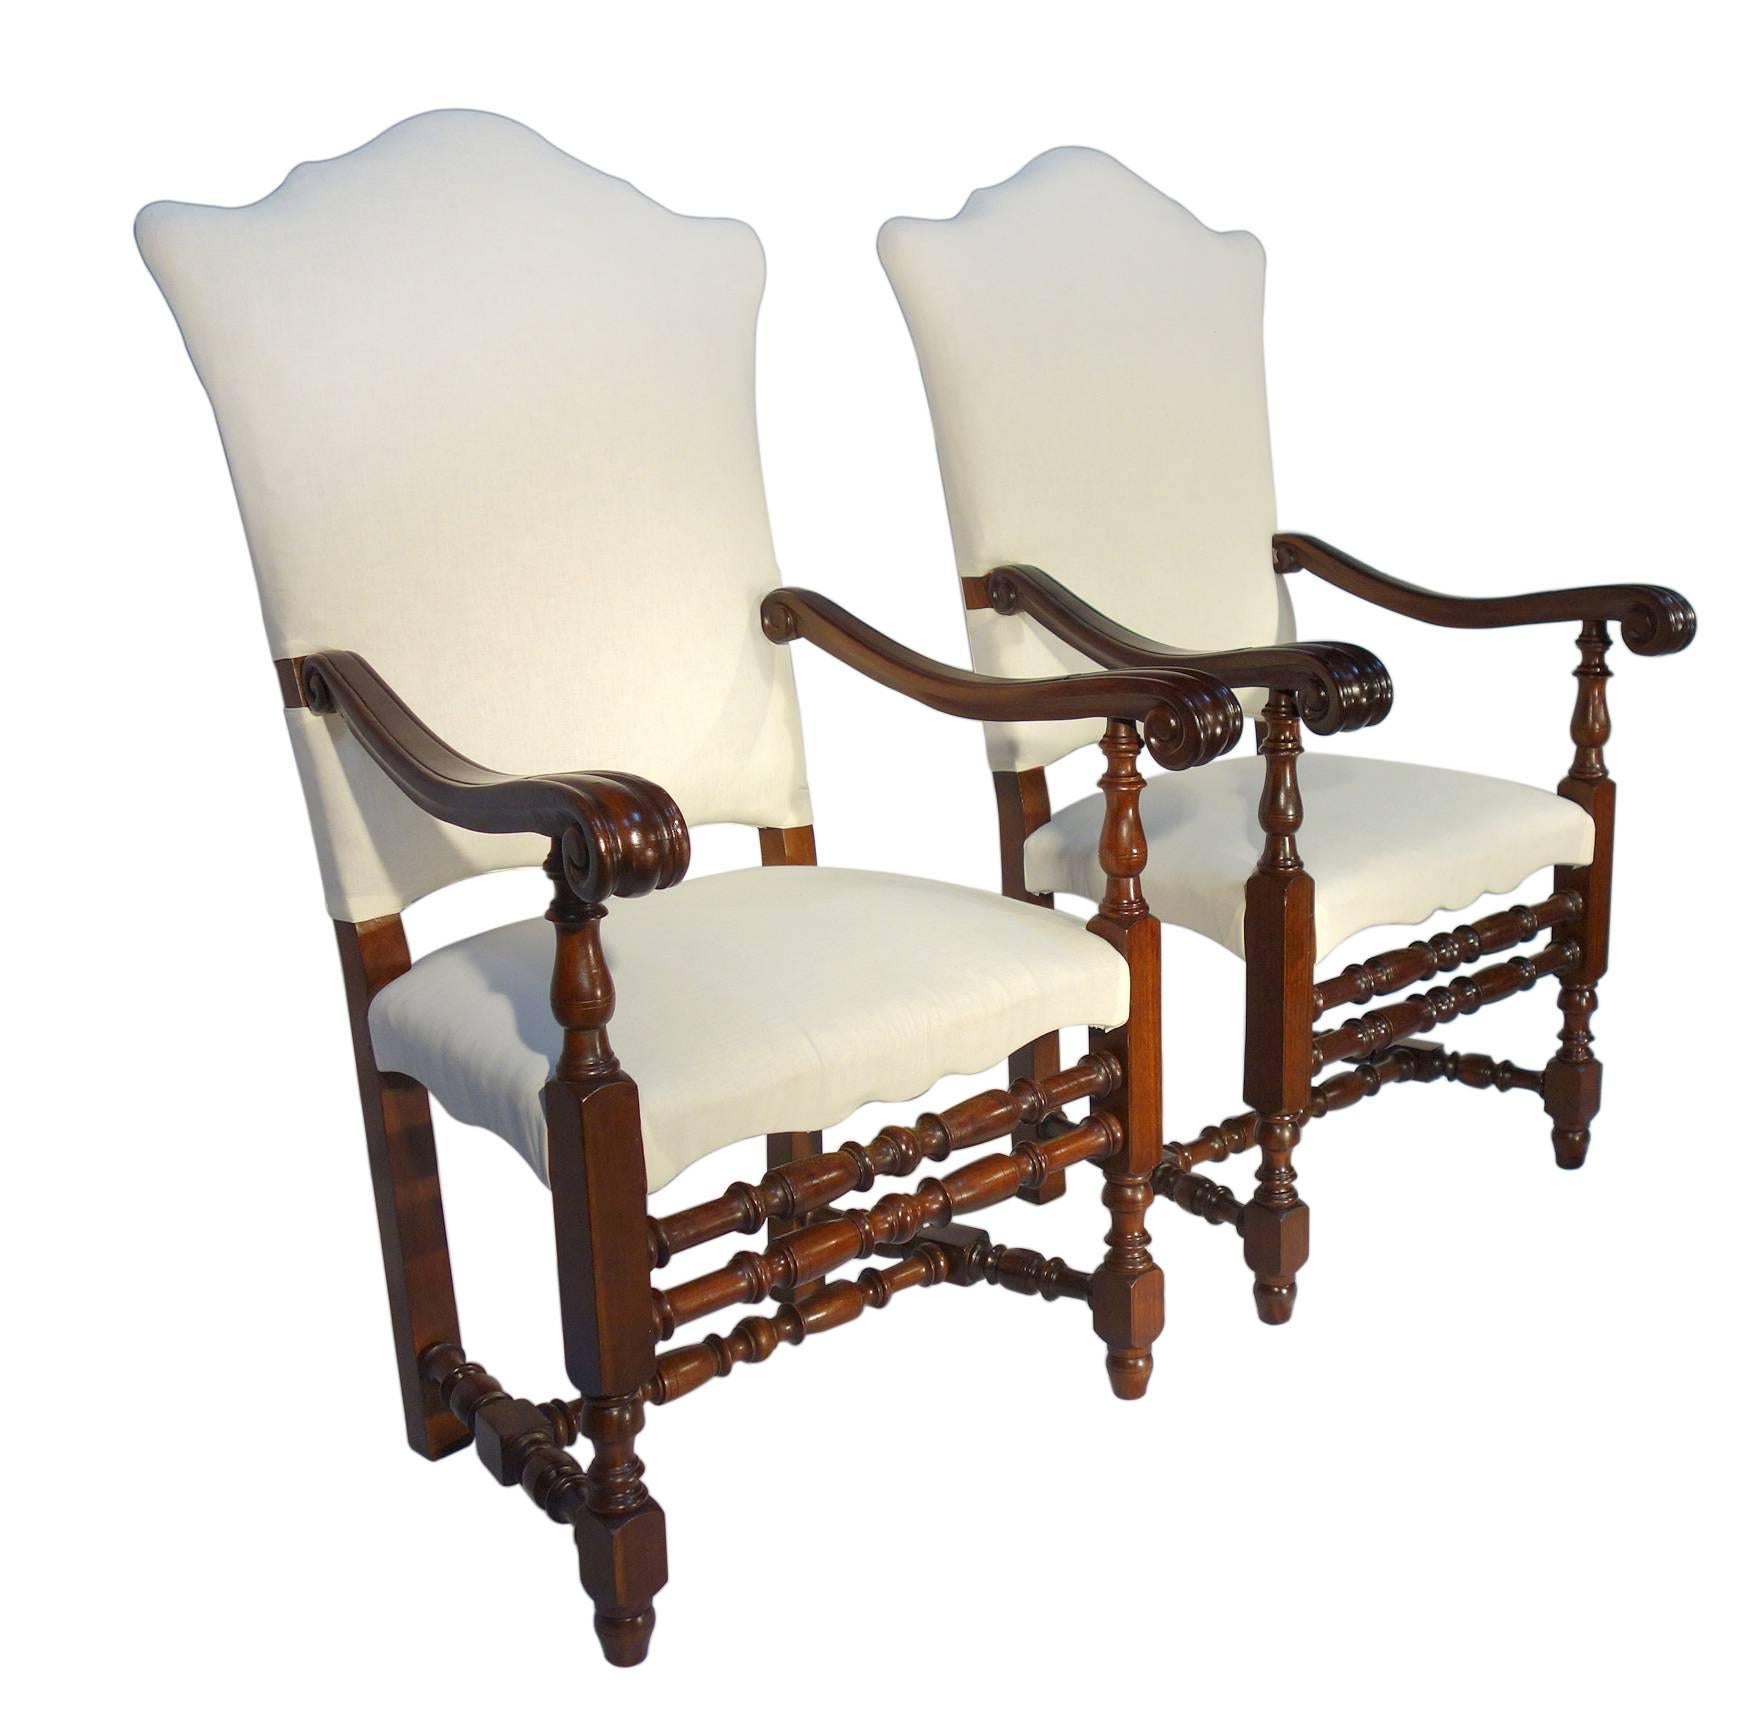 Stately Renaissance, Lombardy, late 17th century style walnut armchair pair, with carved arms and turned wood elements for an elegant, sophisticated dining or occasional setting. Re-upholstery is necessary. Available two pairs.

Measures: